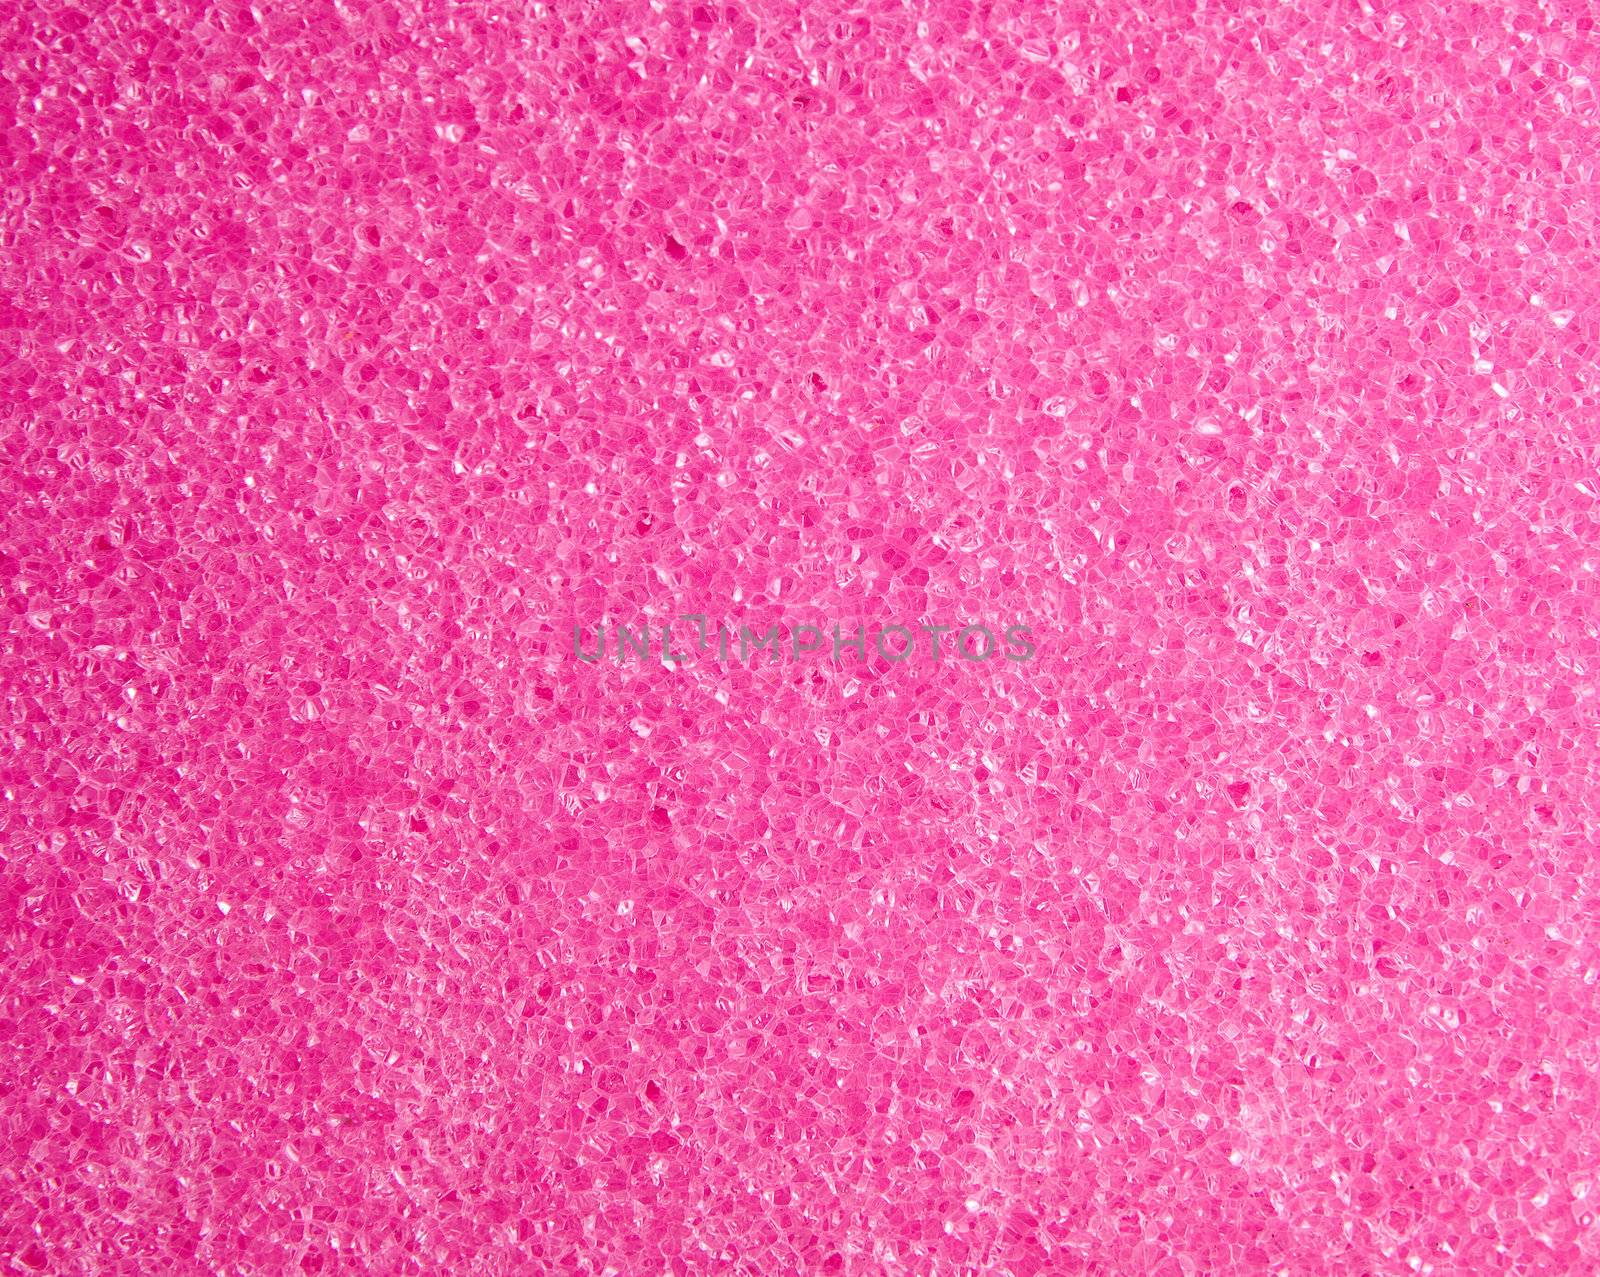 Close up image of pink polymer texture